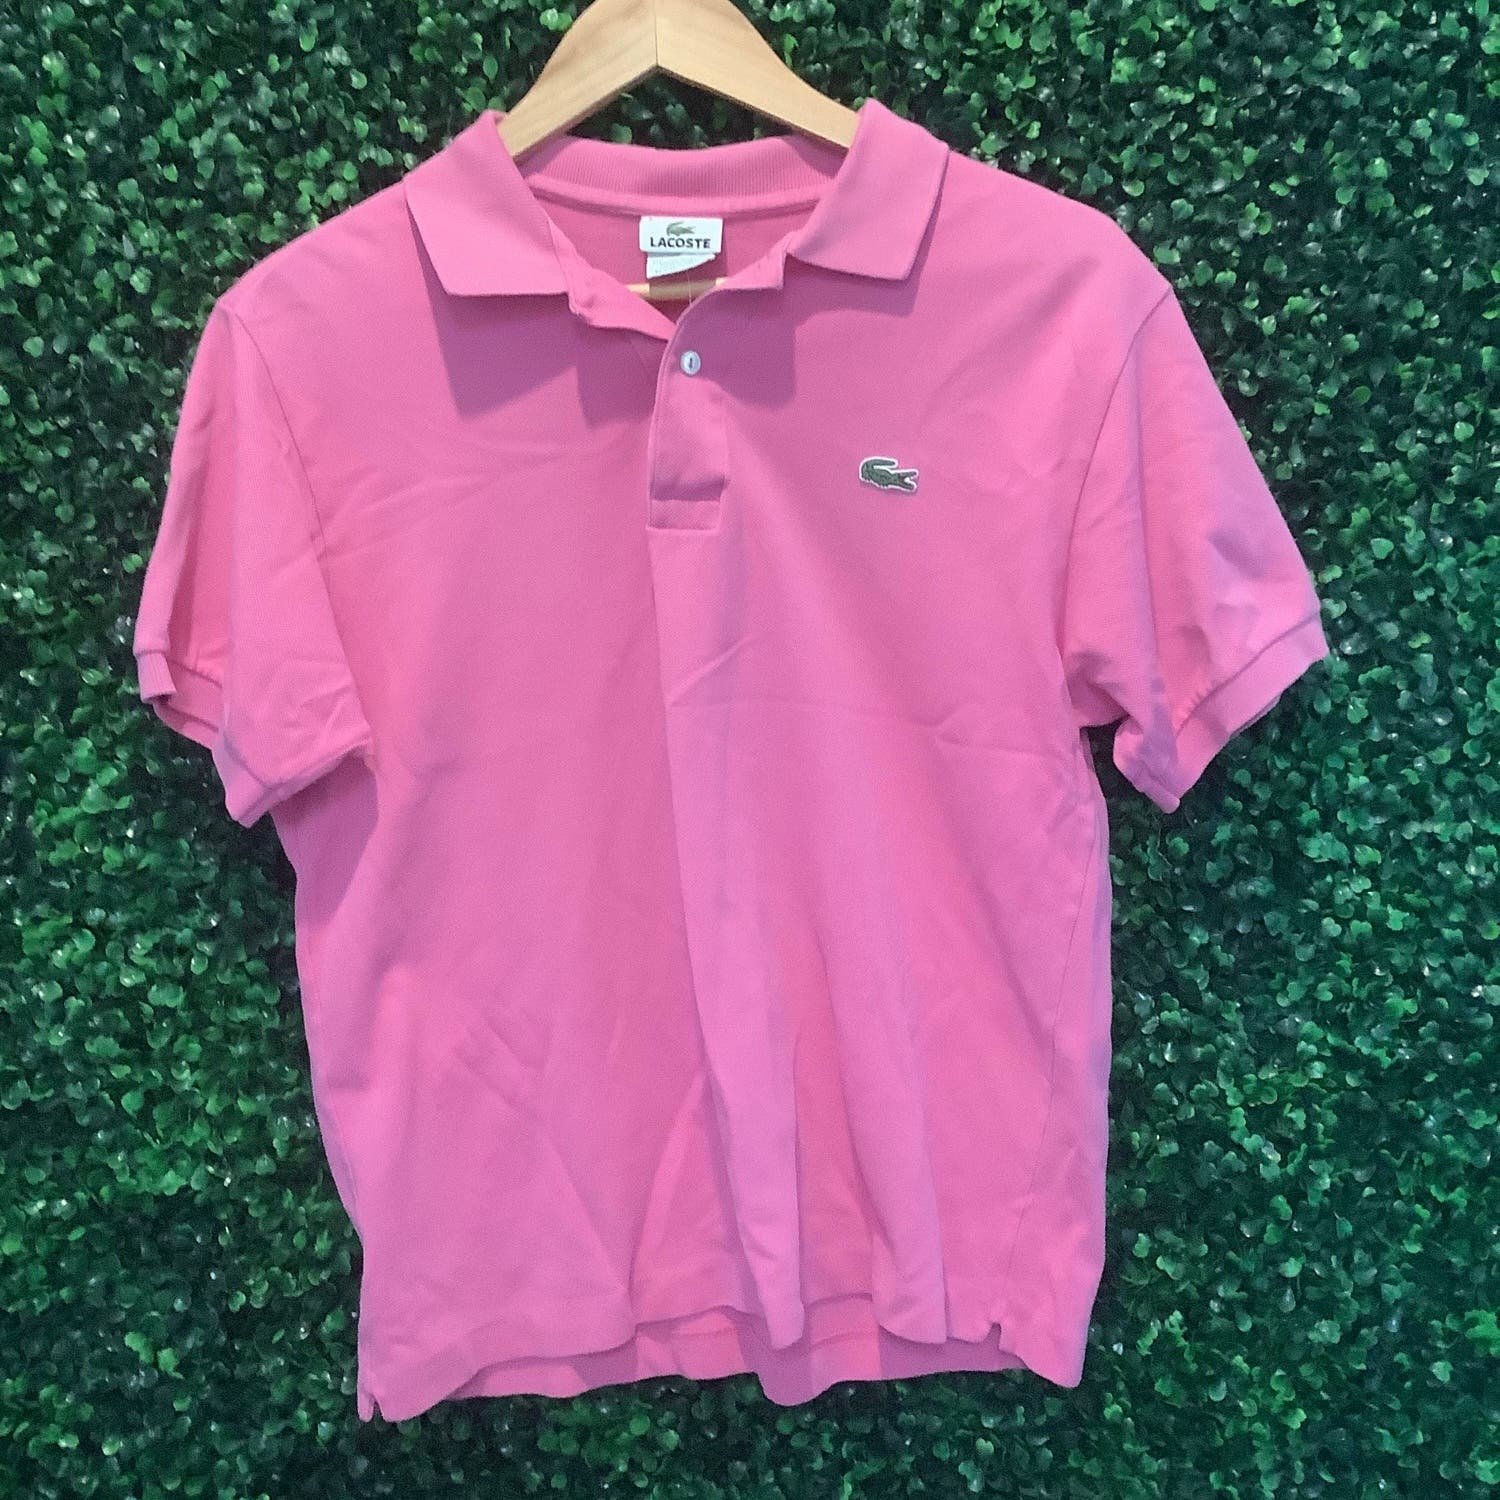 Wholesale price Lacoste Women’s Pink Polo Size 4 I8LAZ4BSf Everyday Low Prices